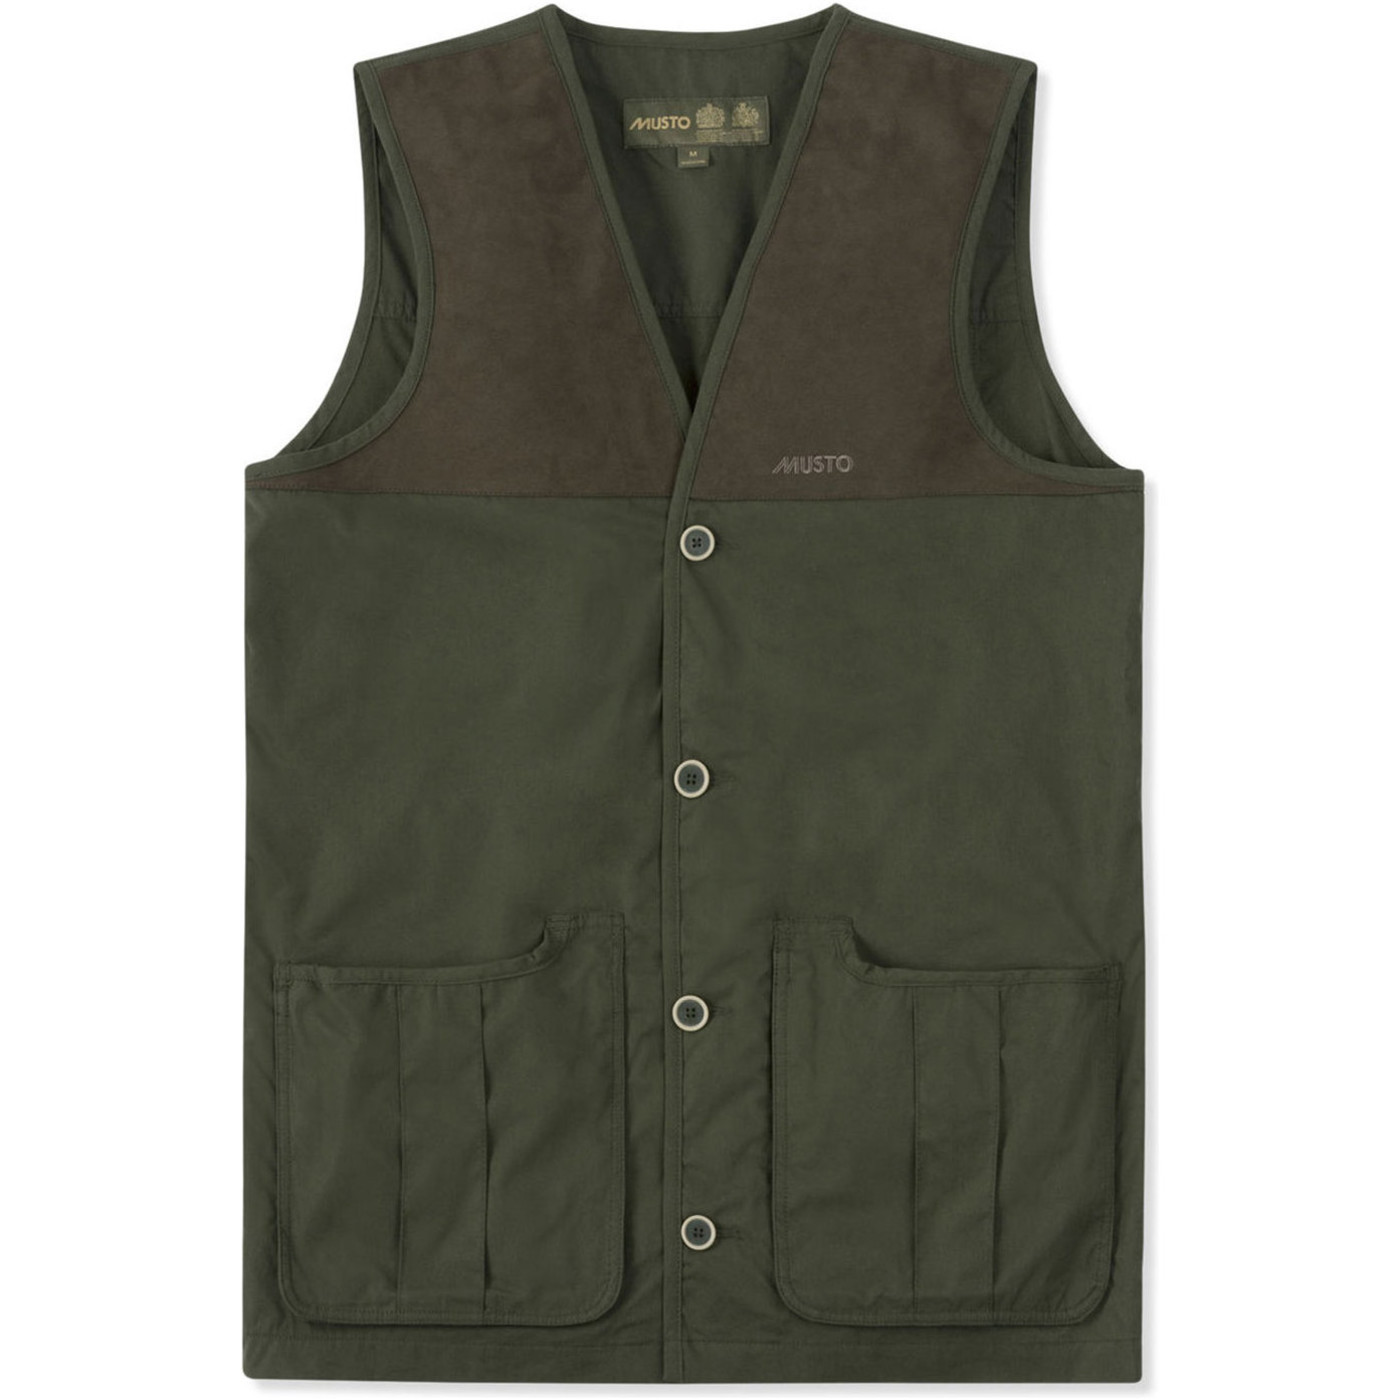 Musto Shooting Vest | The Drillshed